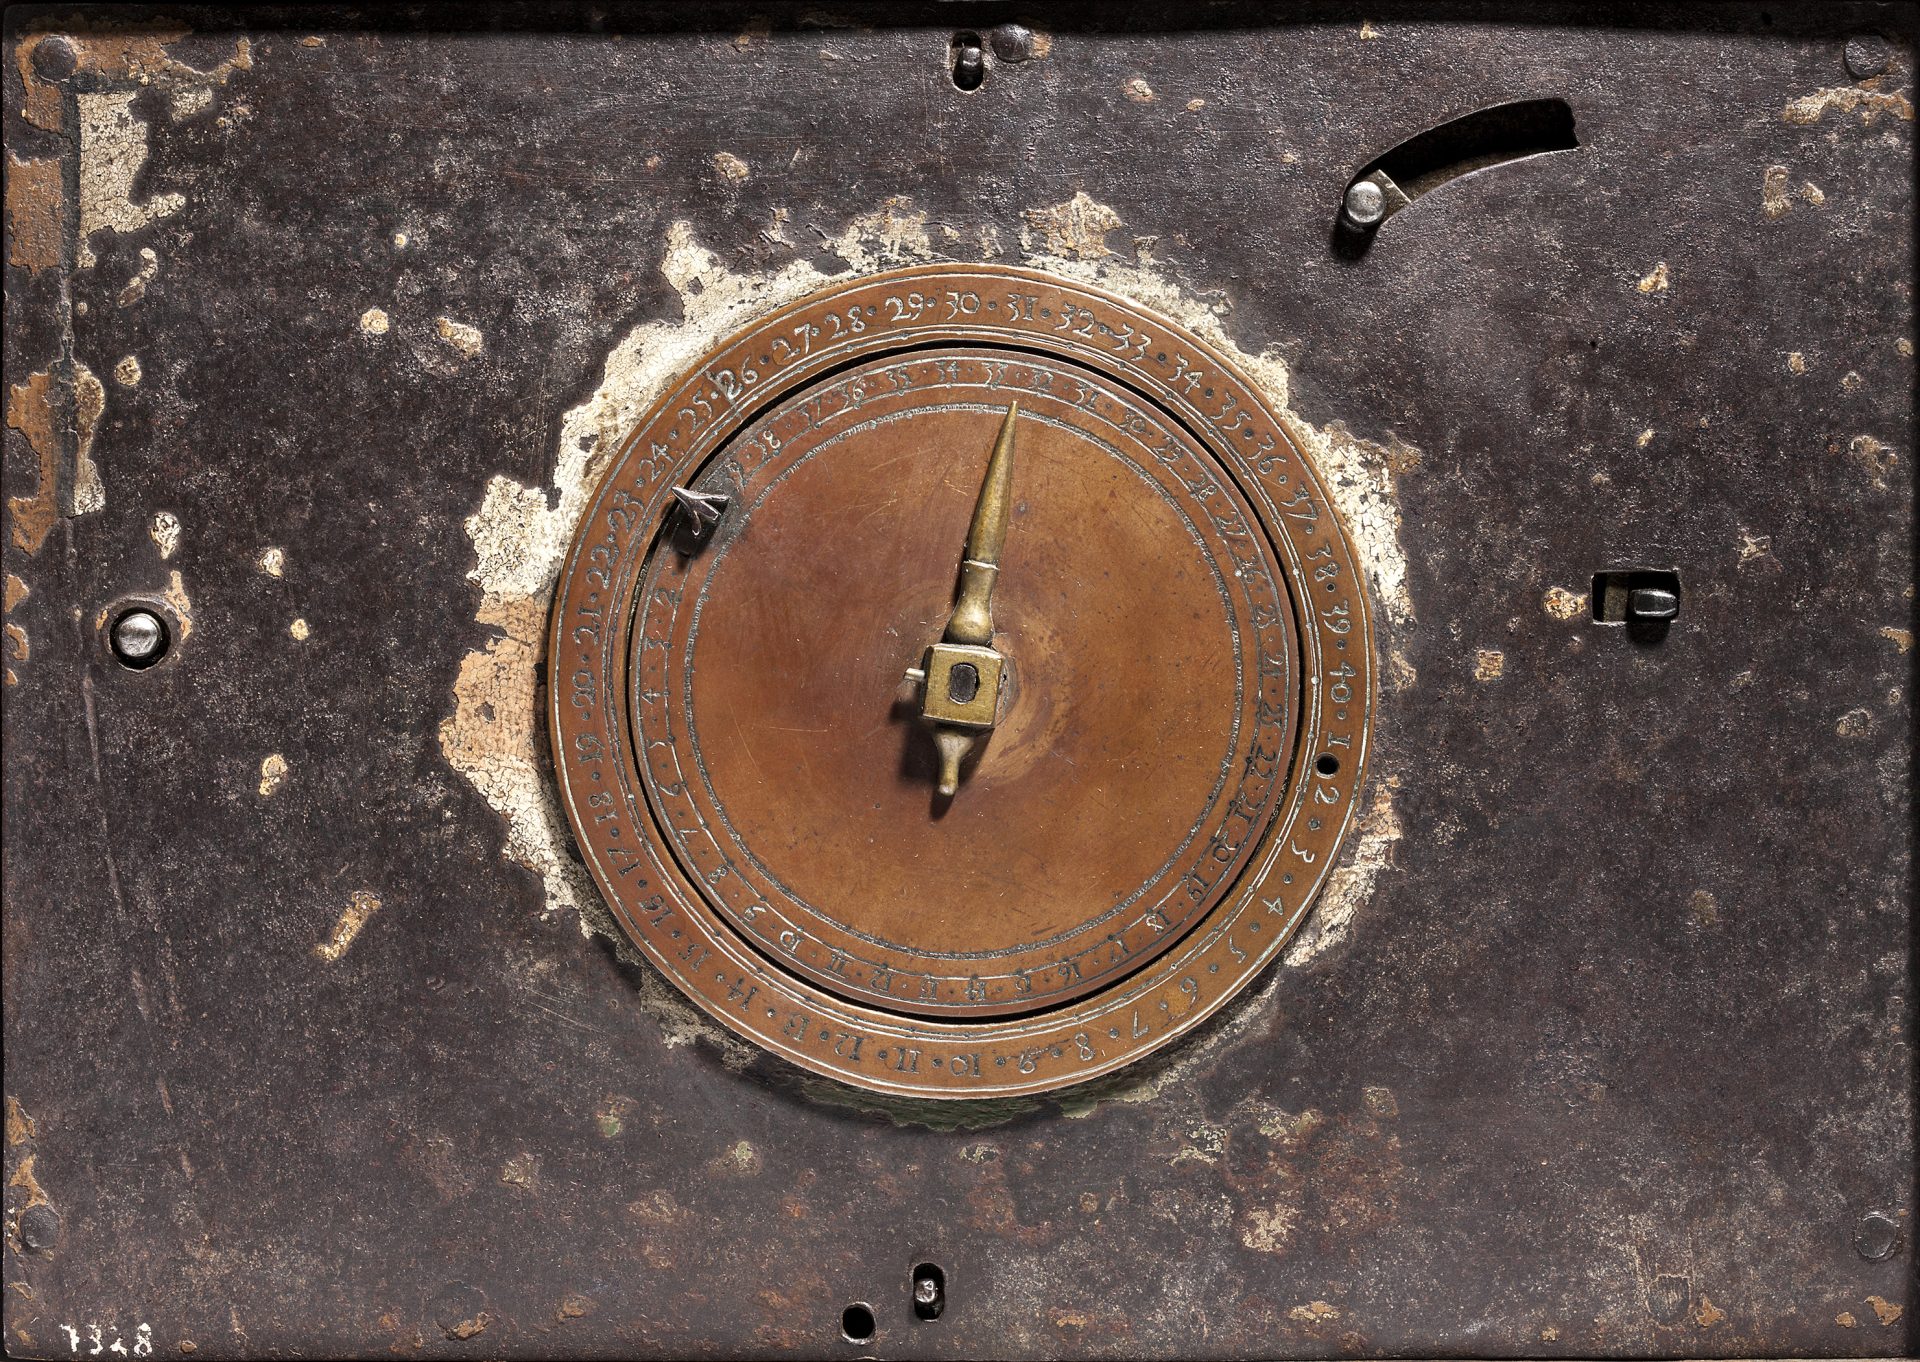 A copper clock-face on a metal background.